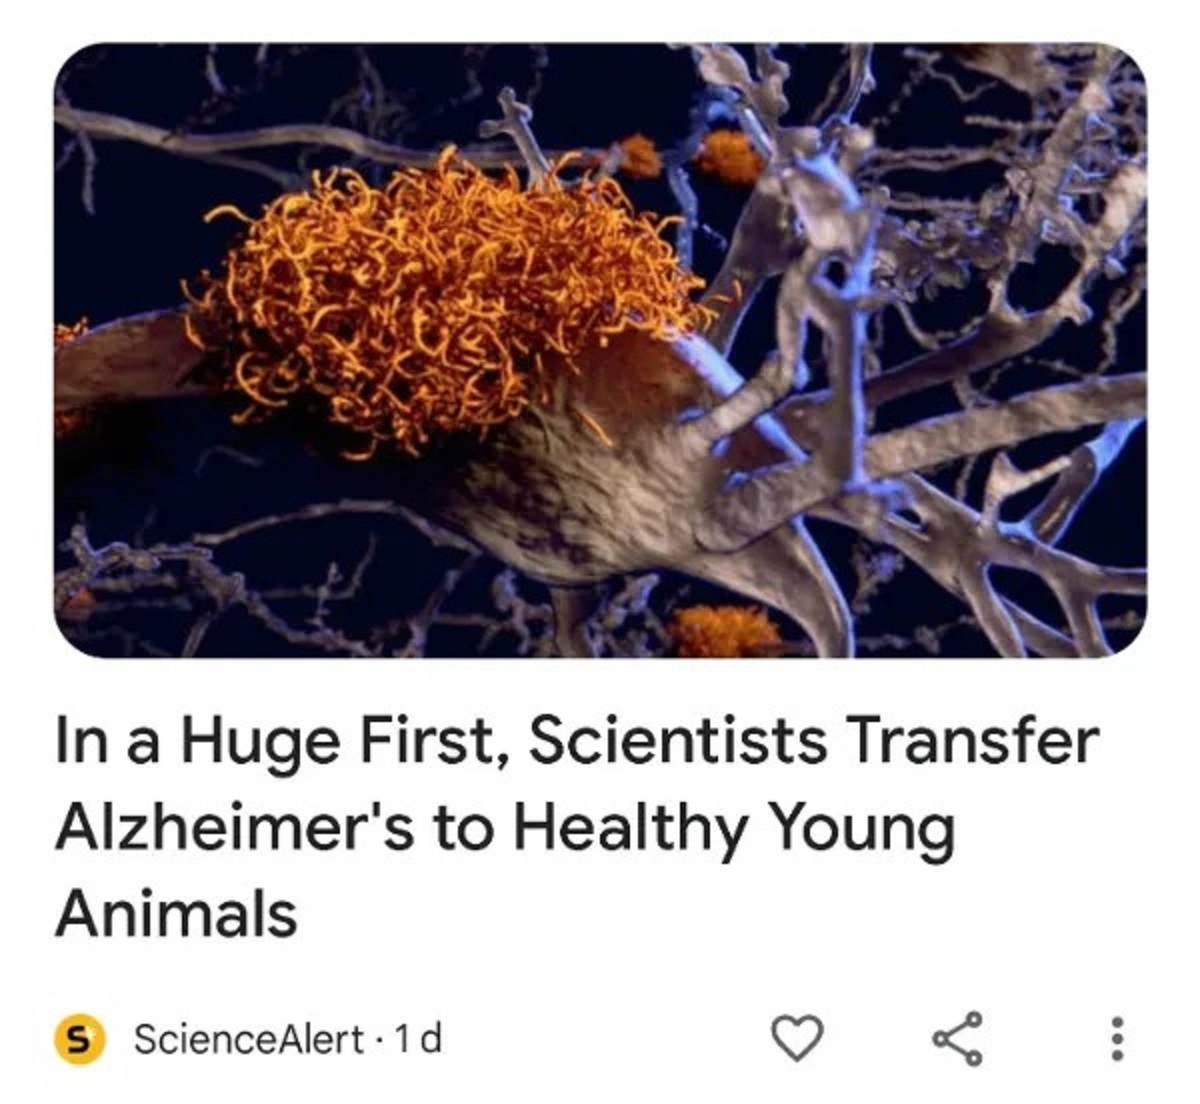 In a Huge First, Scientists Transfer Alzheimer's to Healthy Young Animals S ScienceAlert 1 d Lo ...